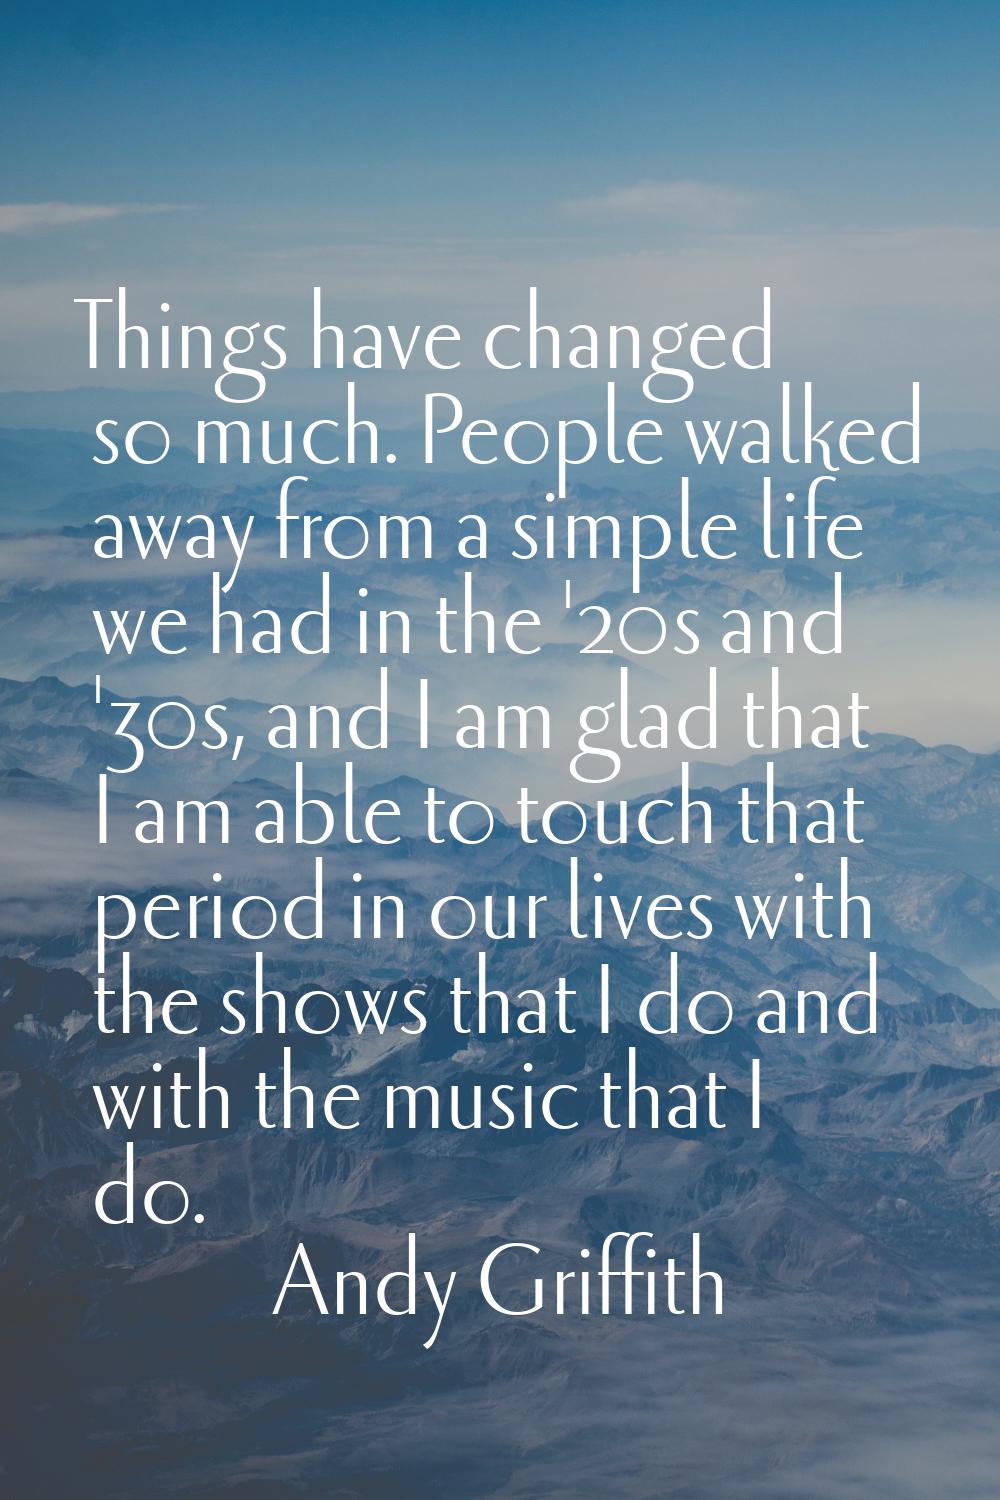 Things have changed so much. People walked away from a simple life we had in the '20s and '30s, and